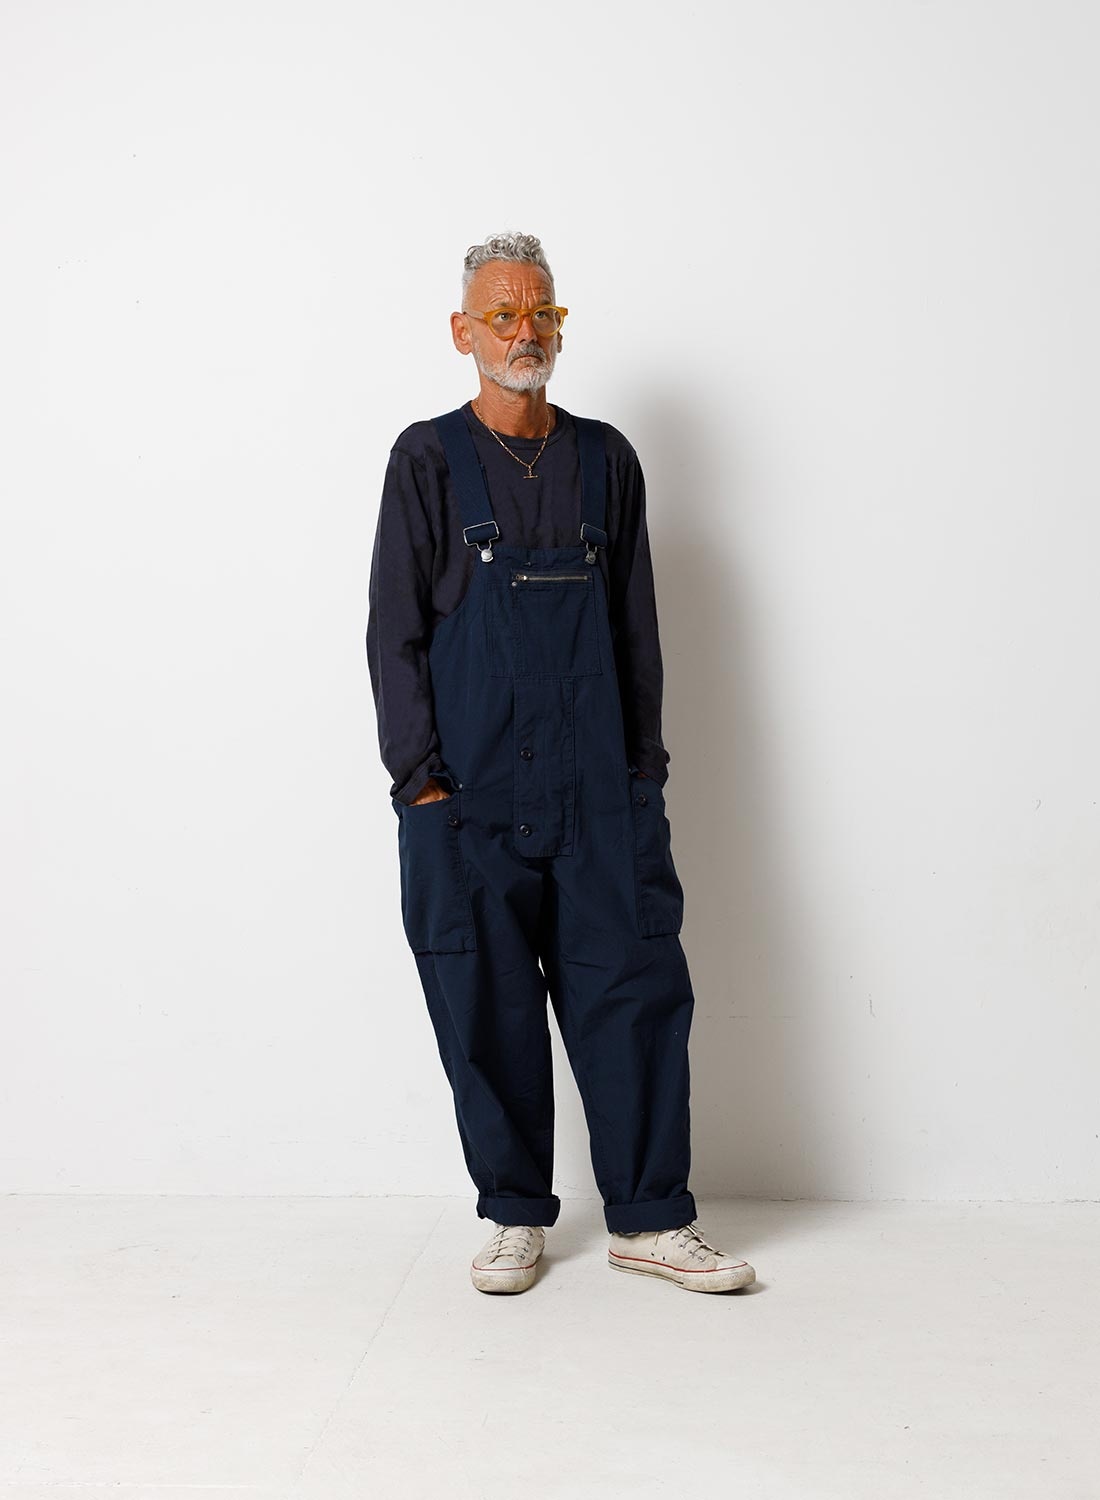 Naval Dungaree in Black Navy (Cotton Ripstop) - 2